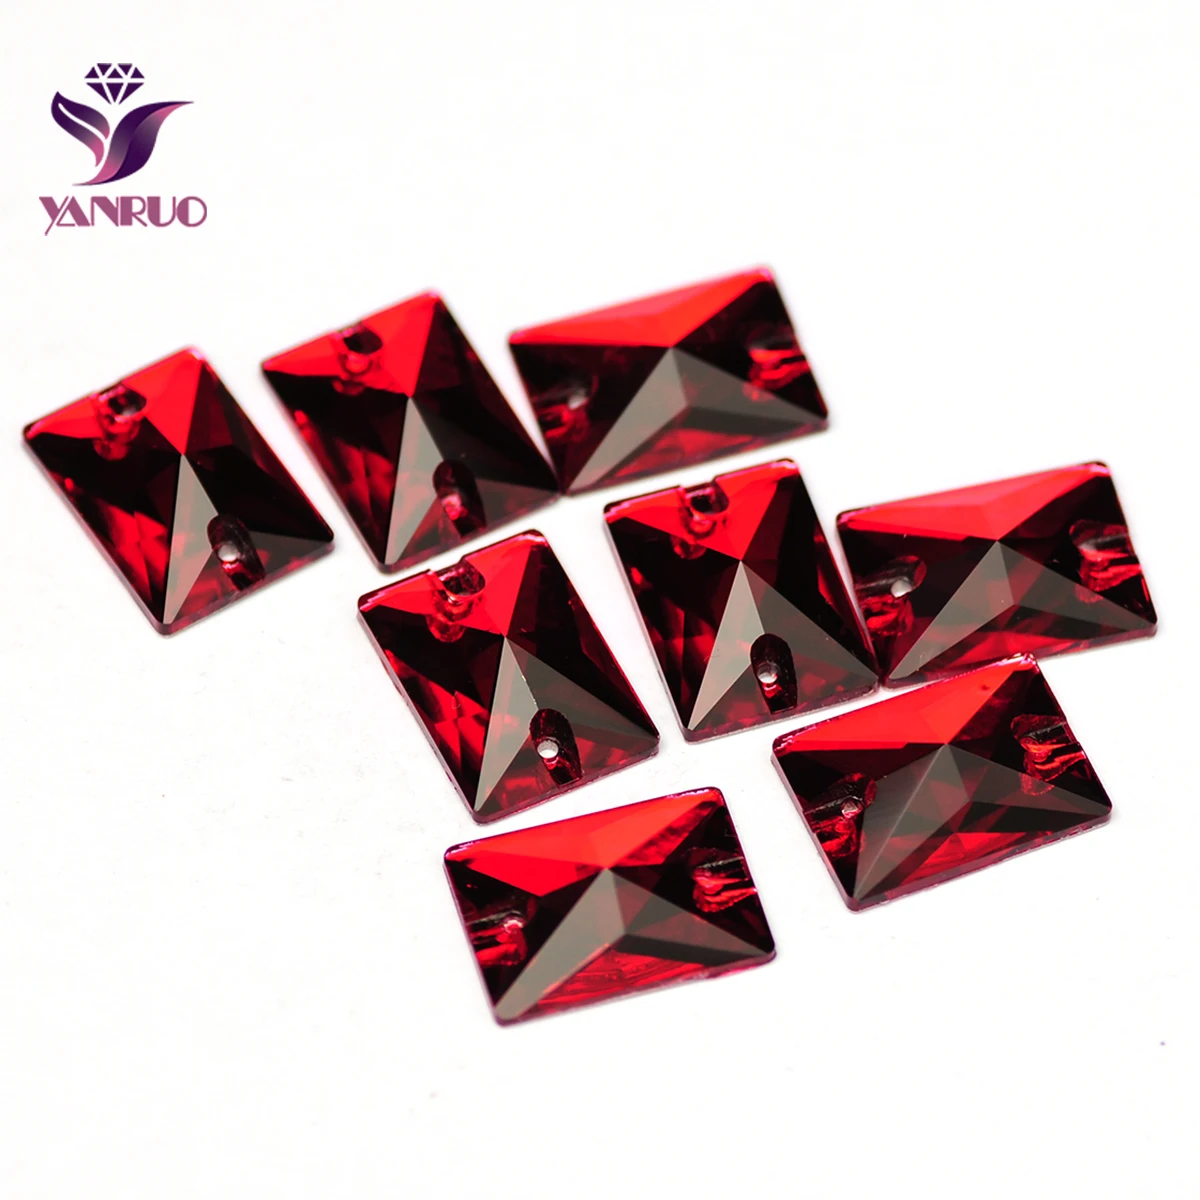 

YANRUO 3250 Rectangle Siam Red Glass Sewing Rhinestones Diamonds for Clothes Needlework Craft Design